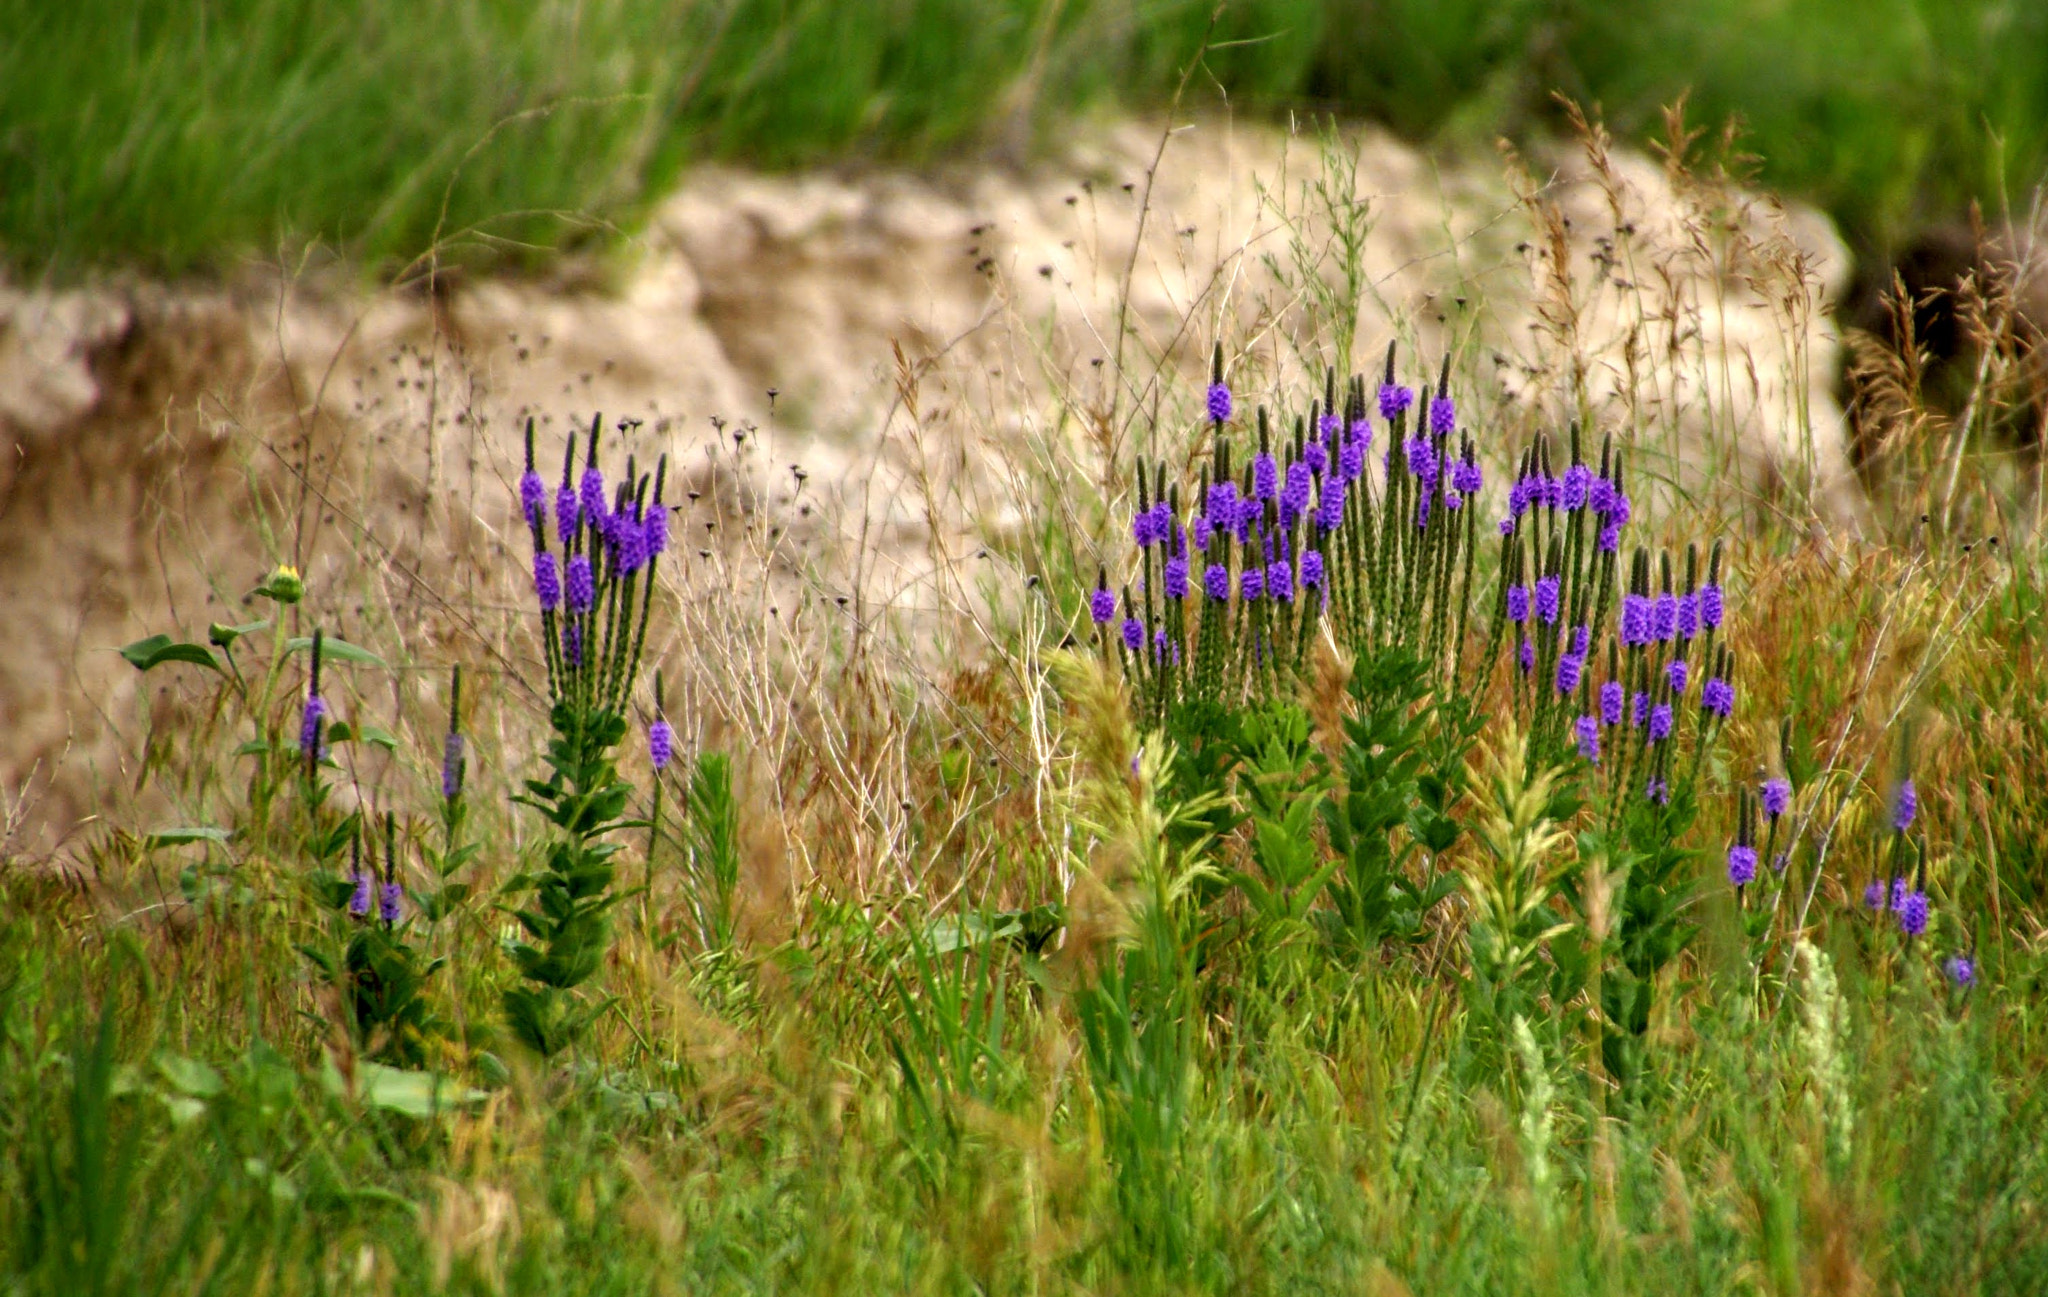 Sony Alpha DSLR-A100 + Tamron 16-300mm F3.5-6.3 Di II VC PZD Macro sample photo. Flowers in the badlands photography